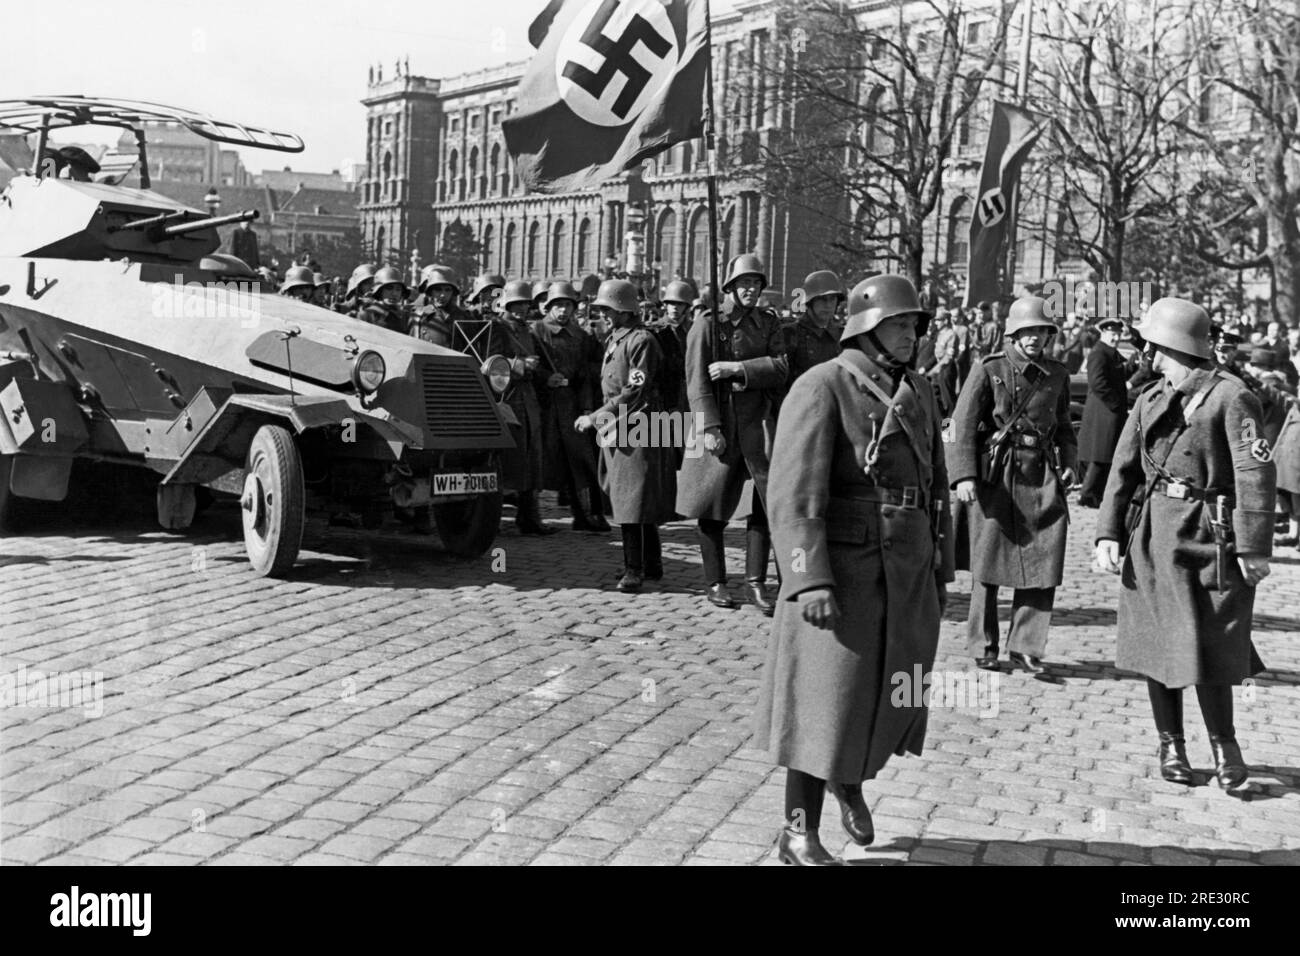 Vienna, Austria:  March 13, 1938 A German Panzer and troops in the streeets of Vienna. Stock Photo